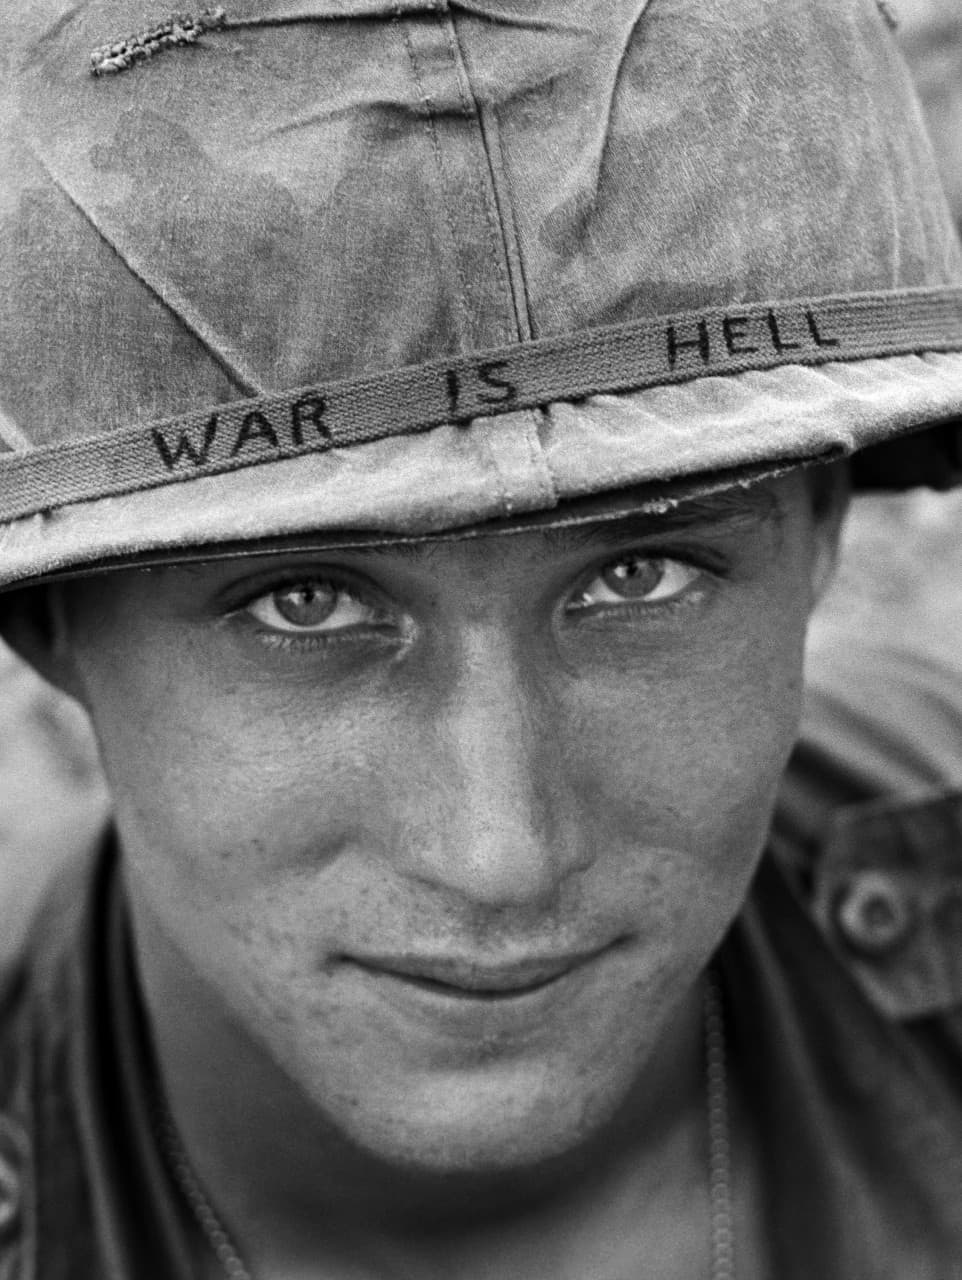 An unidentified American soldier wears a hand-lettered slogan on his helmet, June 1965. The soldier was serving with the 173rd Airborne Brigade on defense duty at the Phuoc Vinh airfield. (Horst Faas/AP)